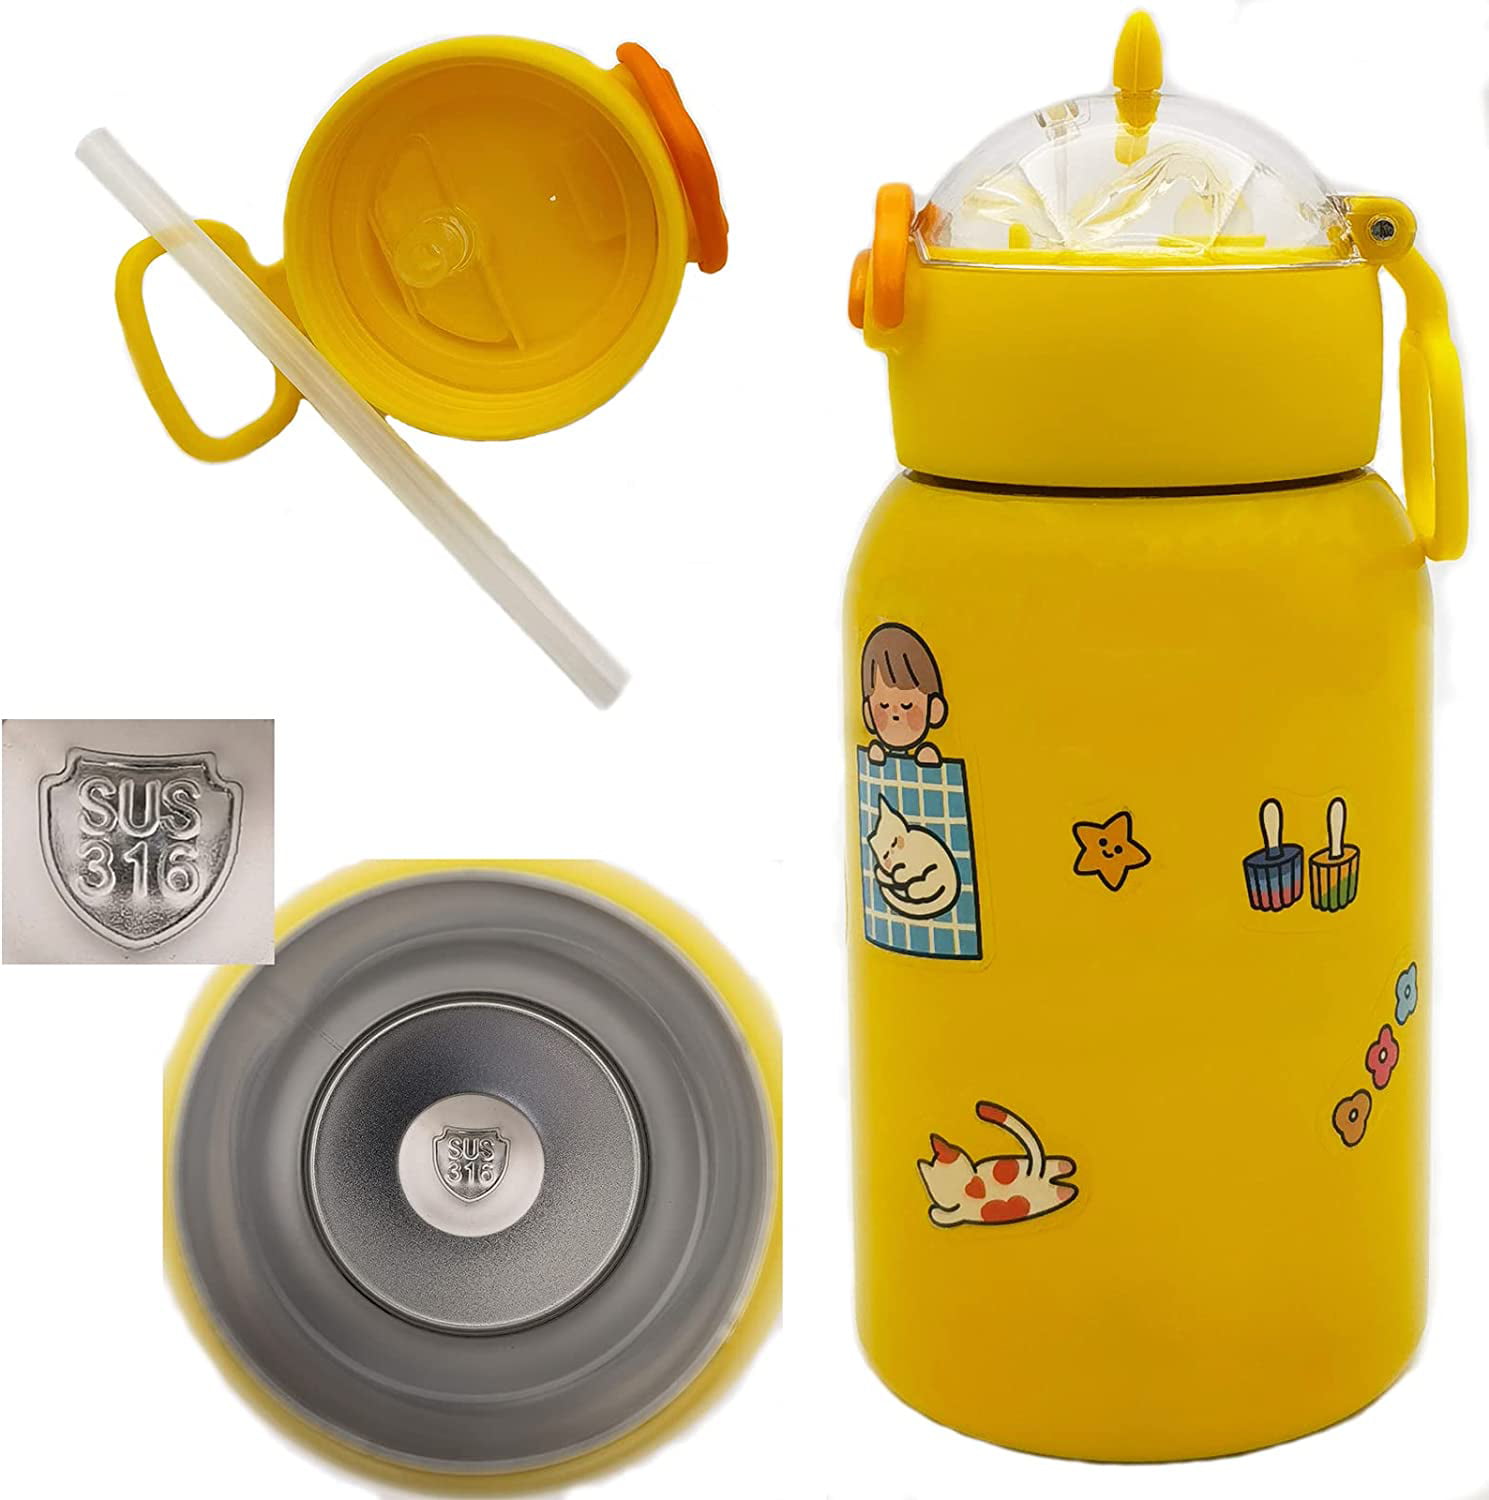 G.Duck Kid Intelligent Thermos Cup With Temperature Display - G.Duck Store